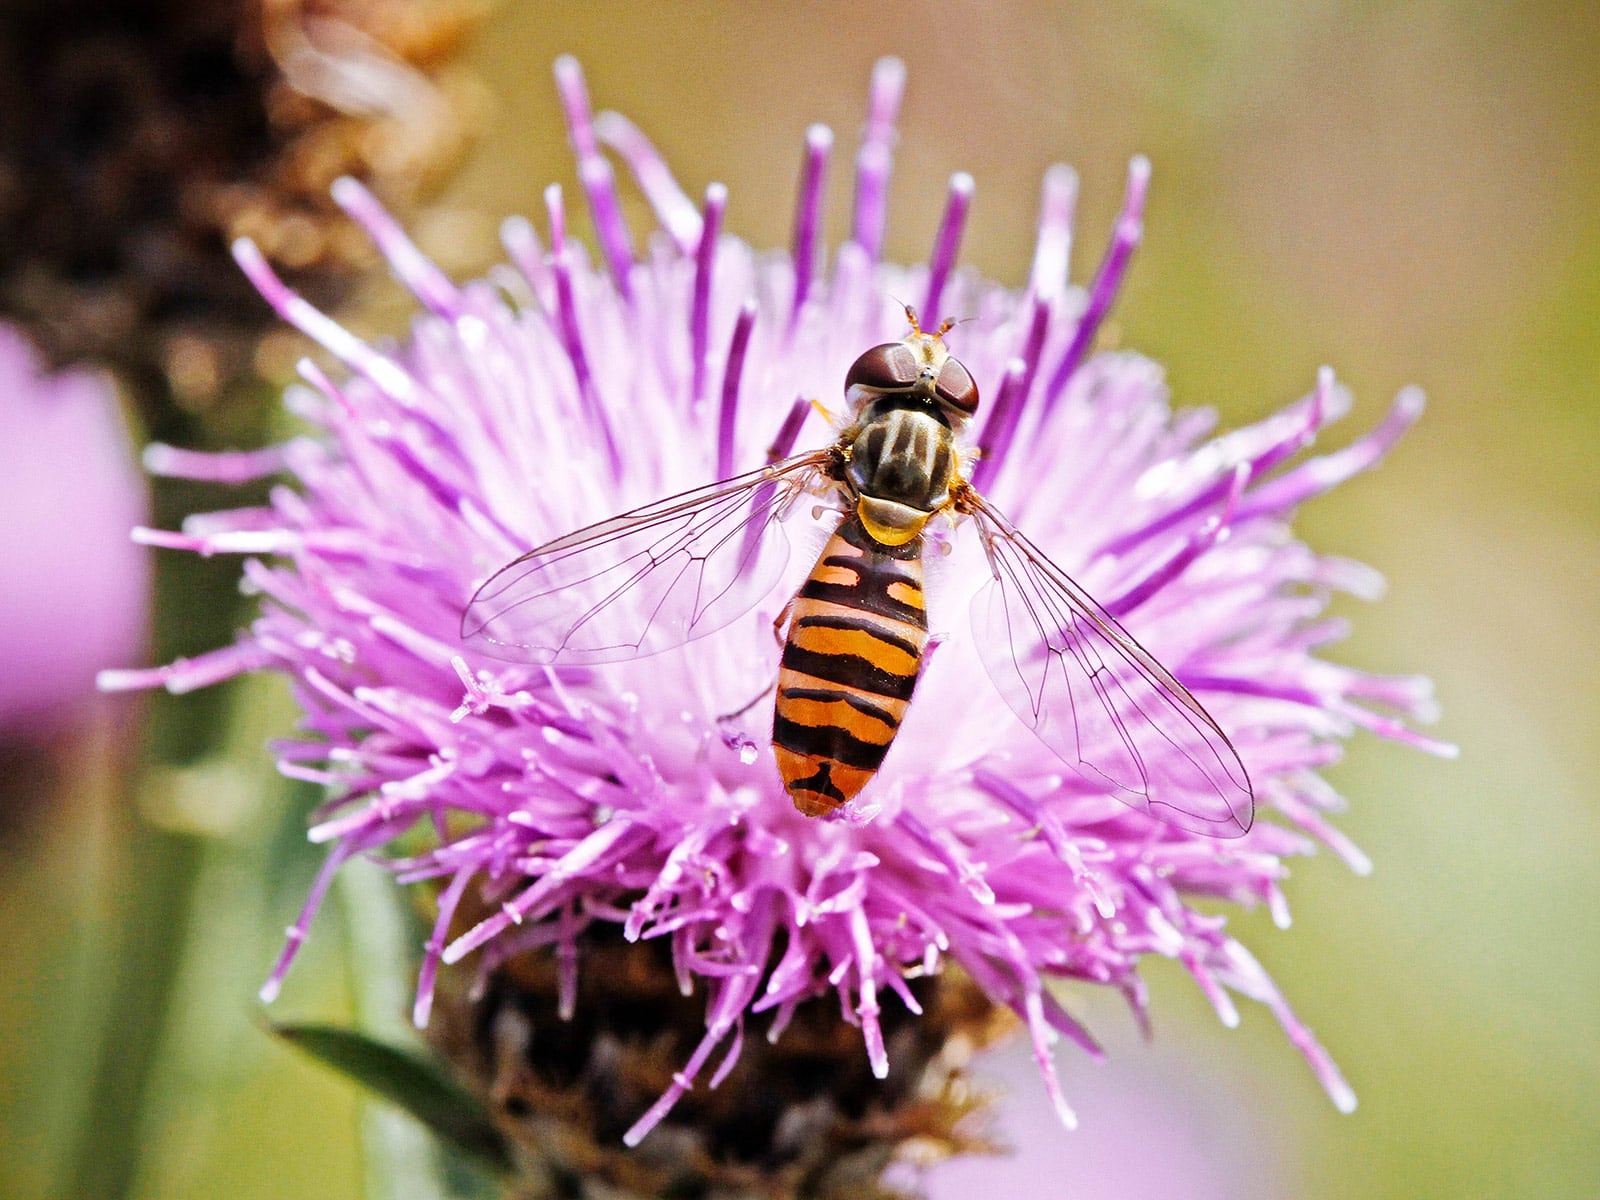 A syrphid fly drinking nectar from a thistle flower